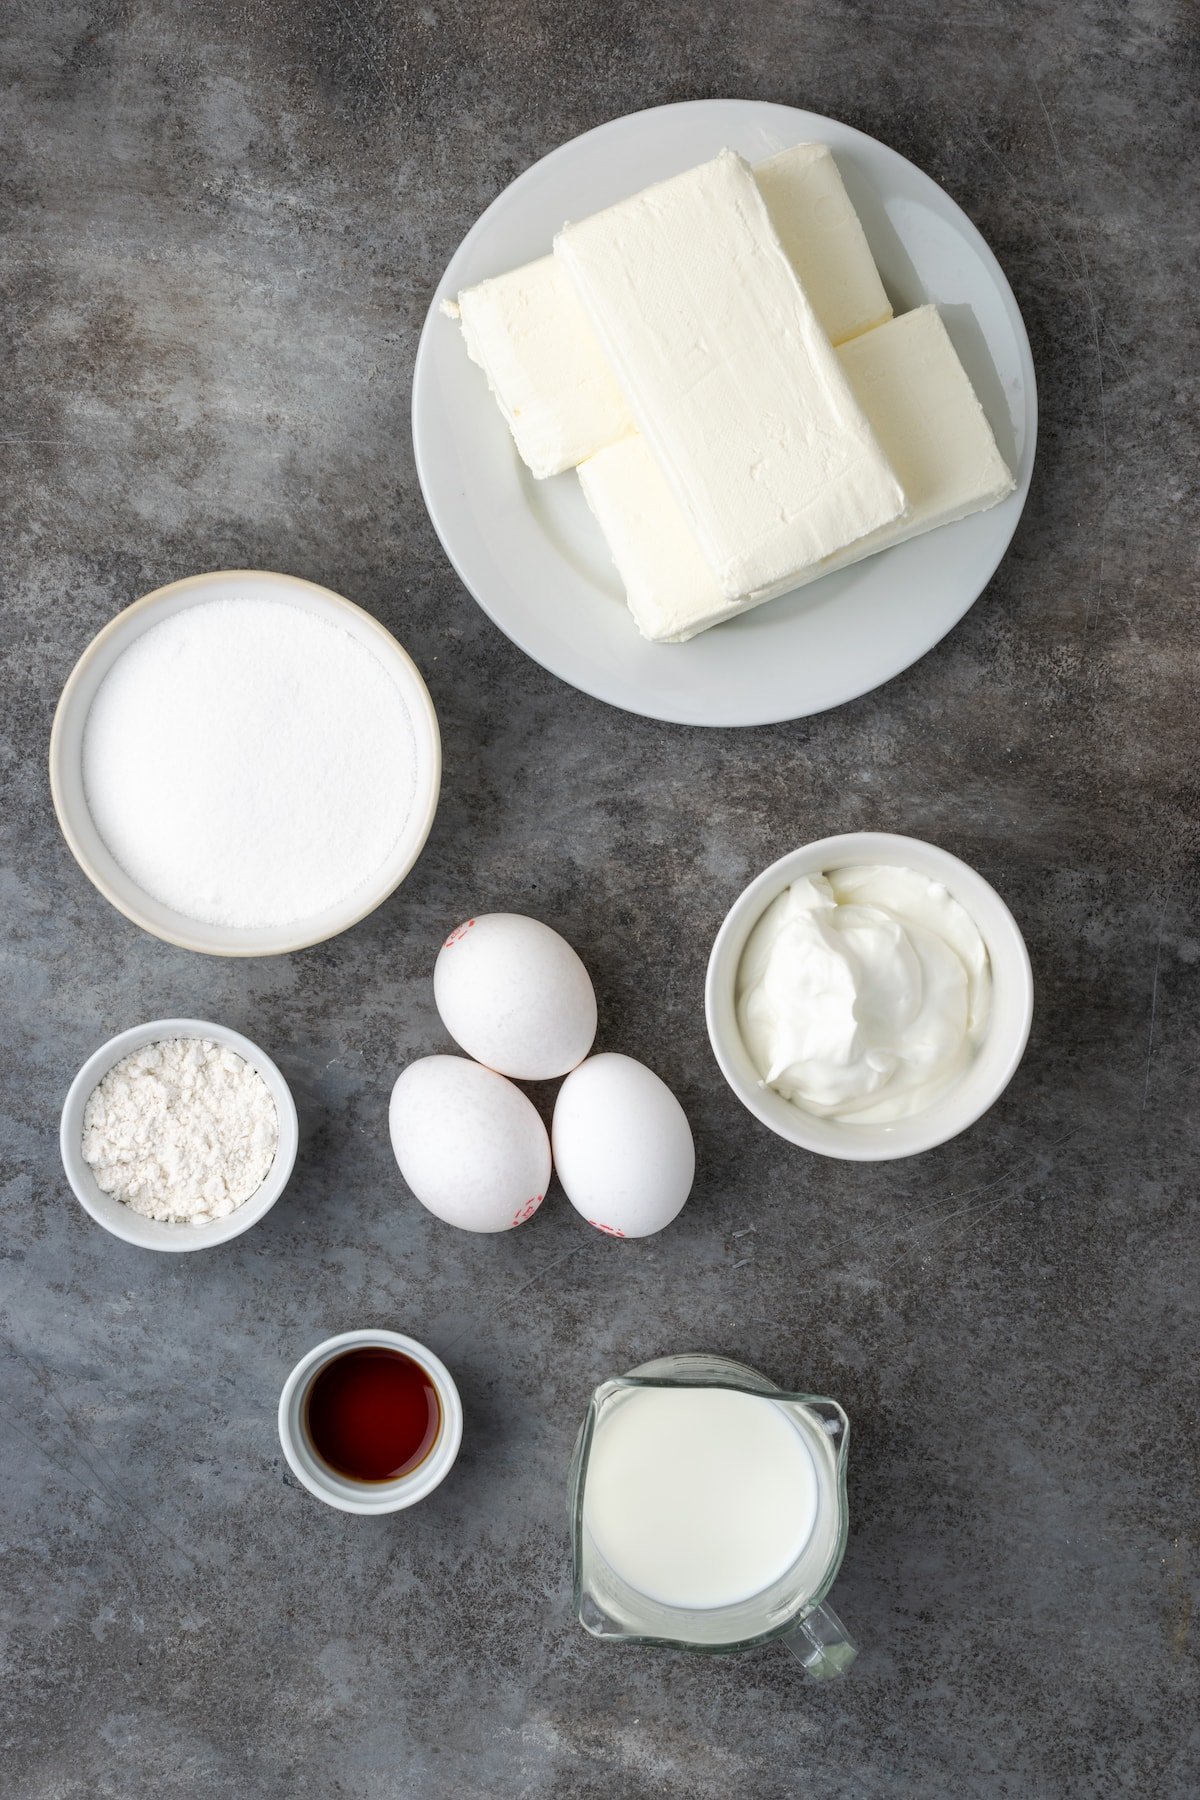 The ingredients for vanilla cheesecake.